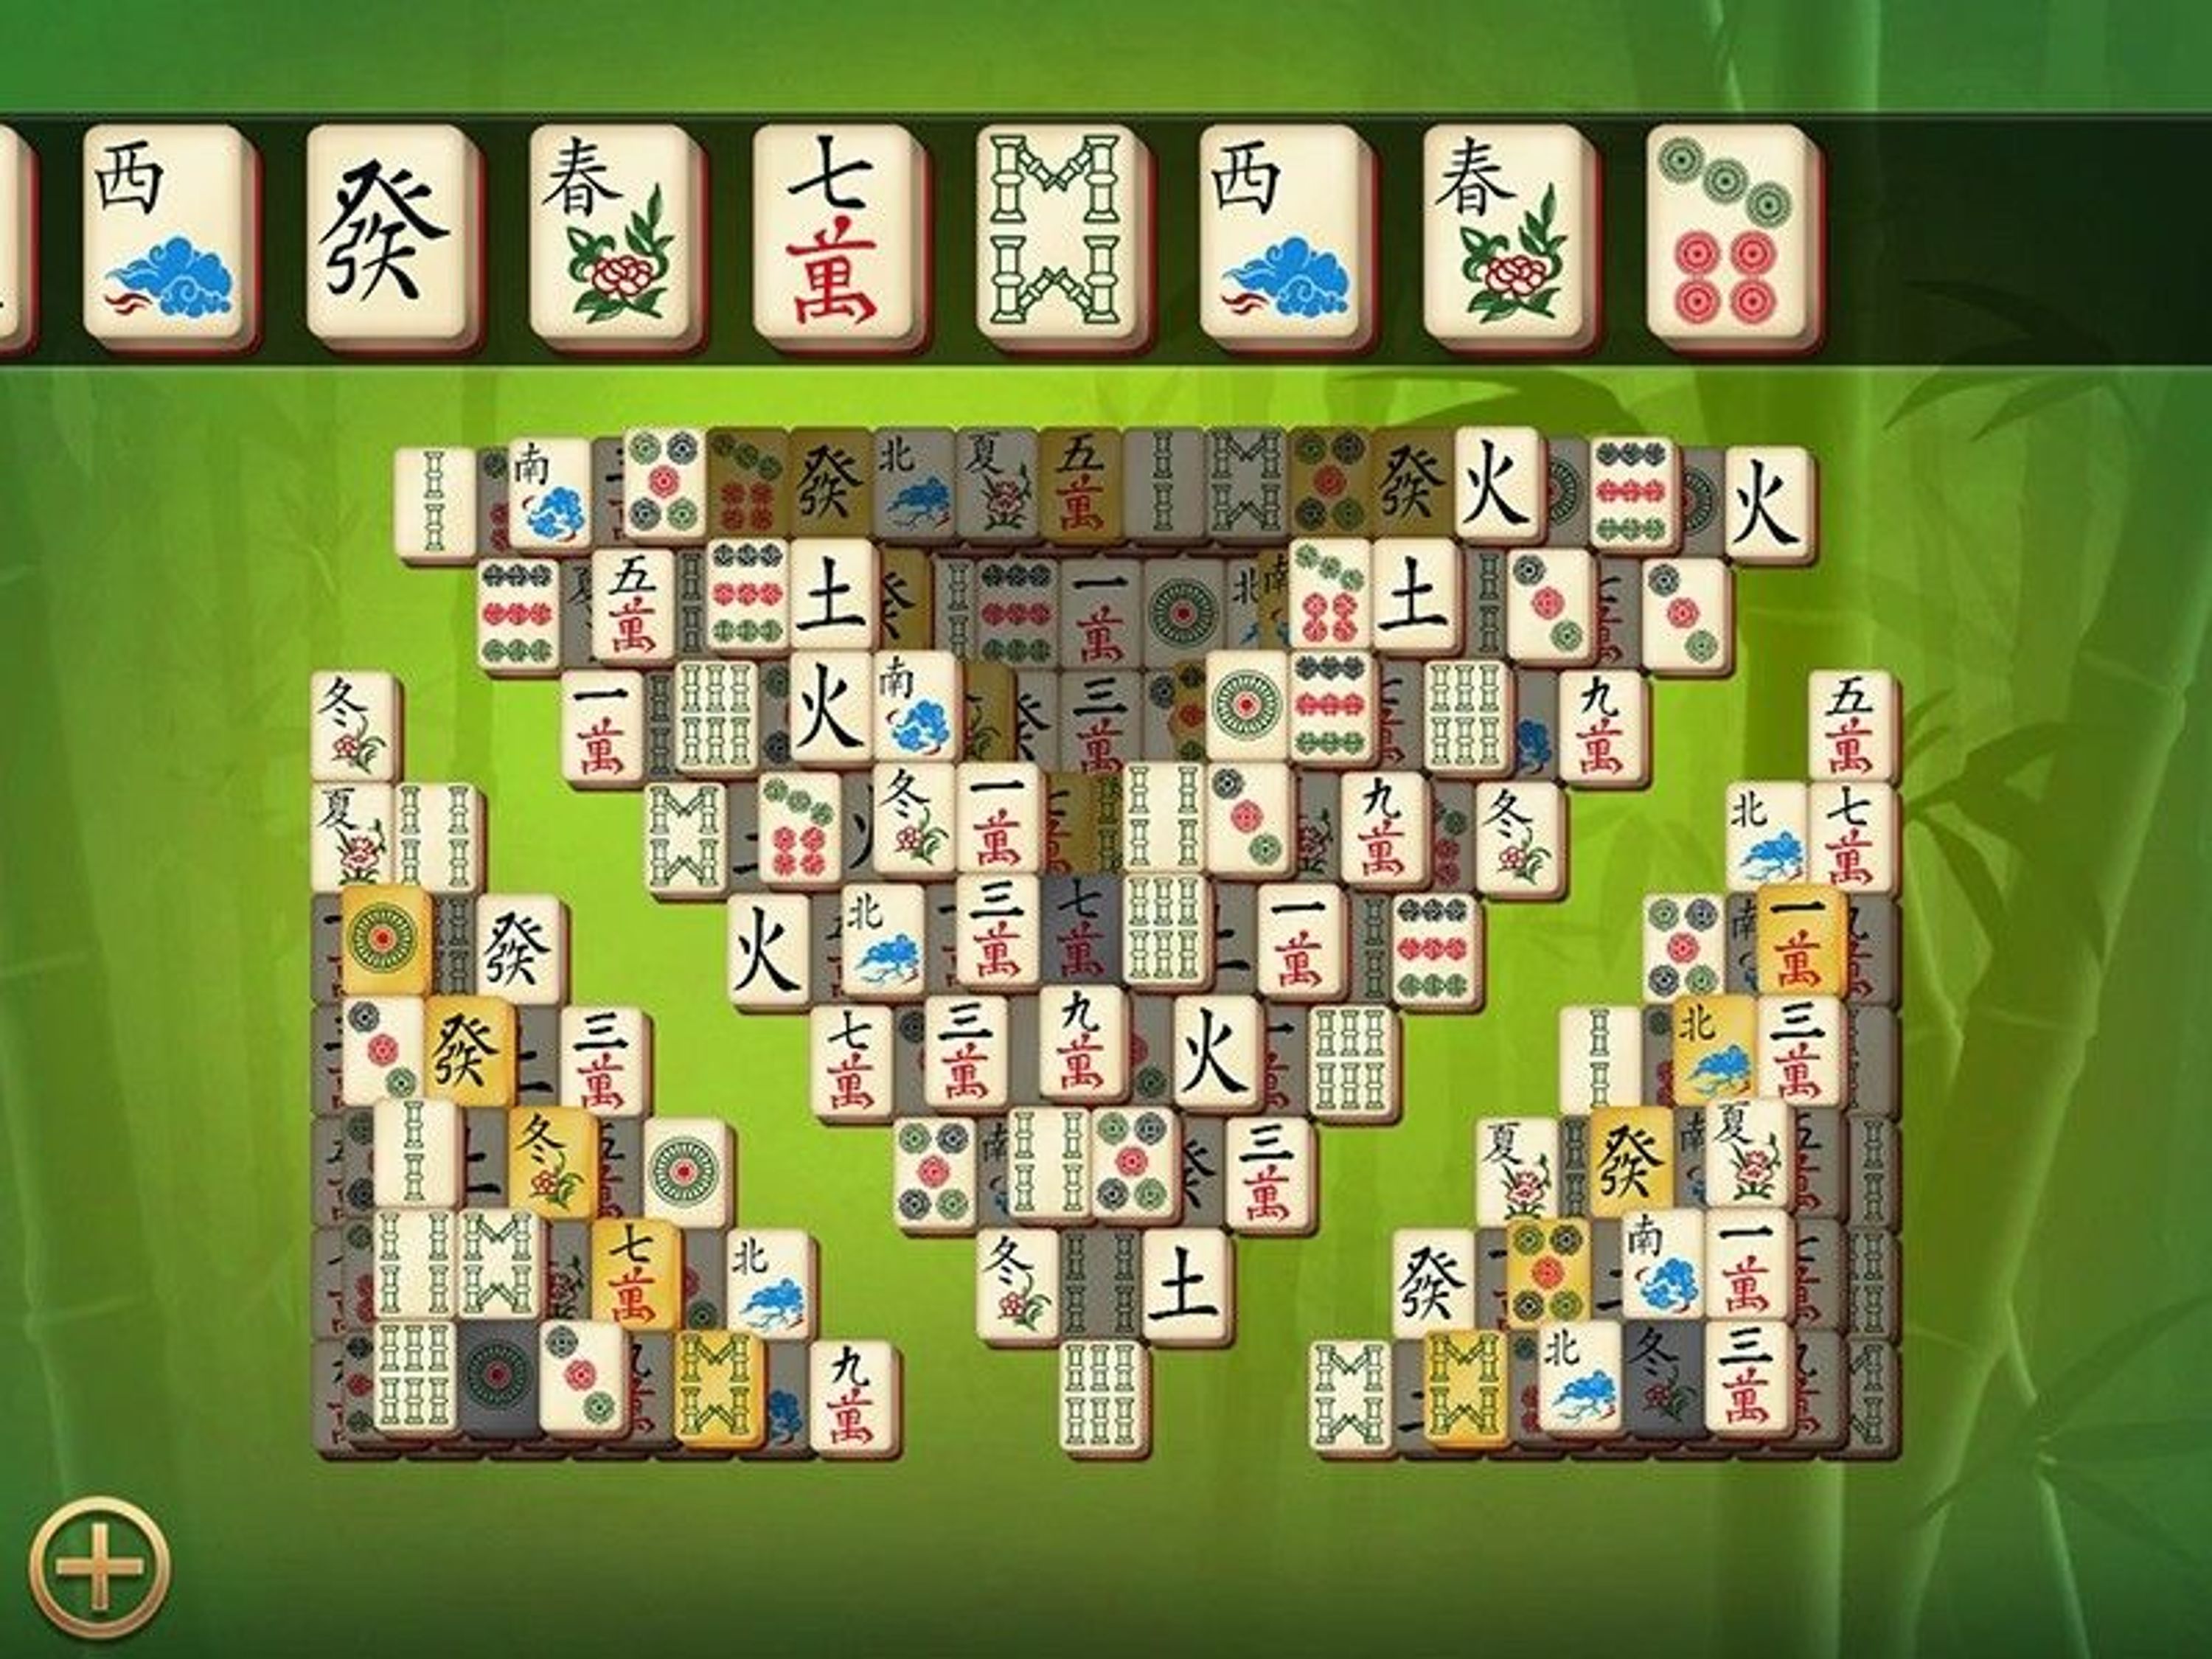 Lost Lands: Mahjong download the last version for apple